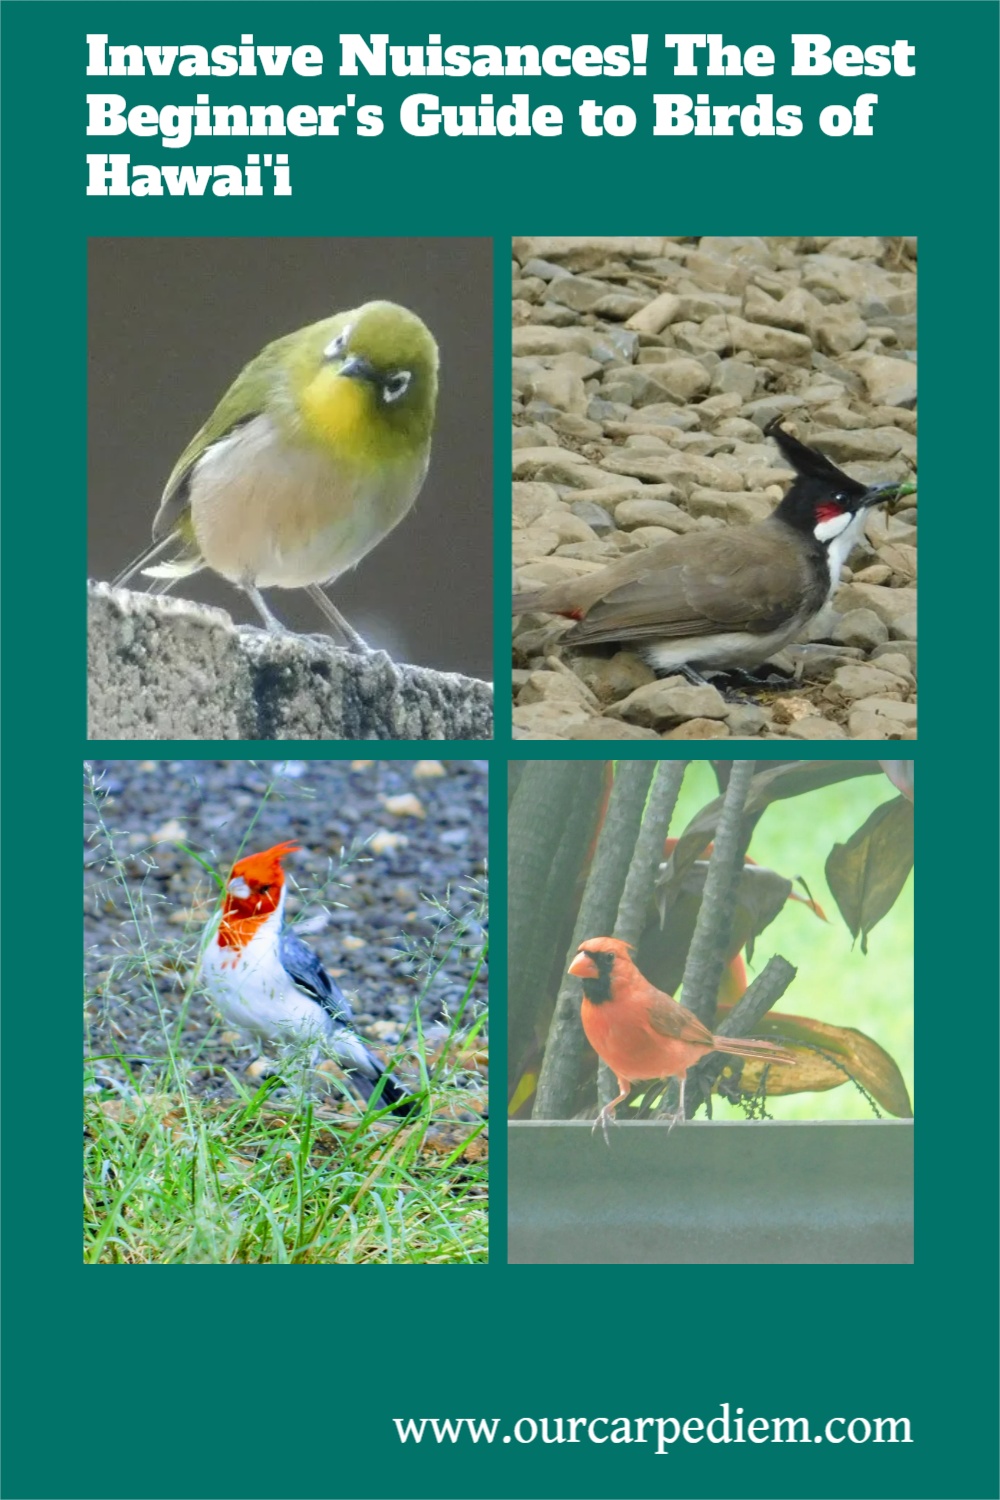 Invasive Nuisances! The Best Beginner’s Guide to Birds of Hawai’i